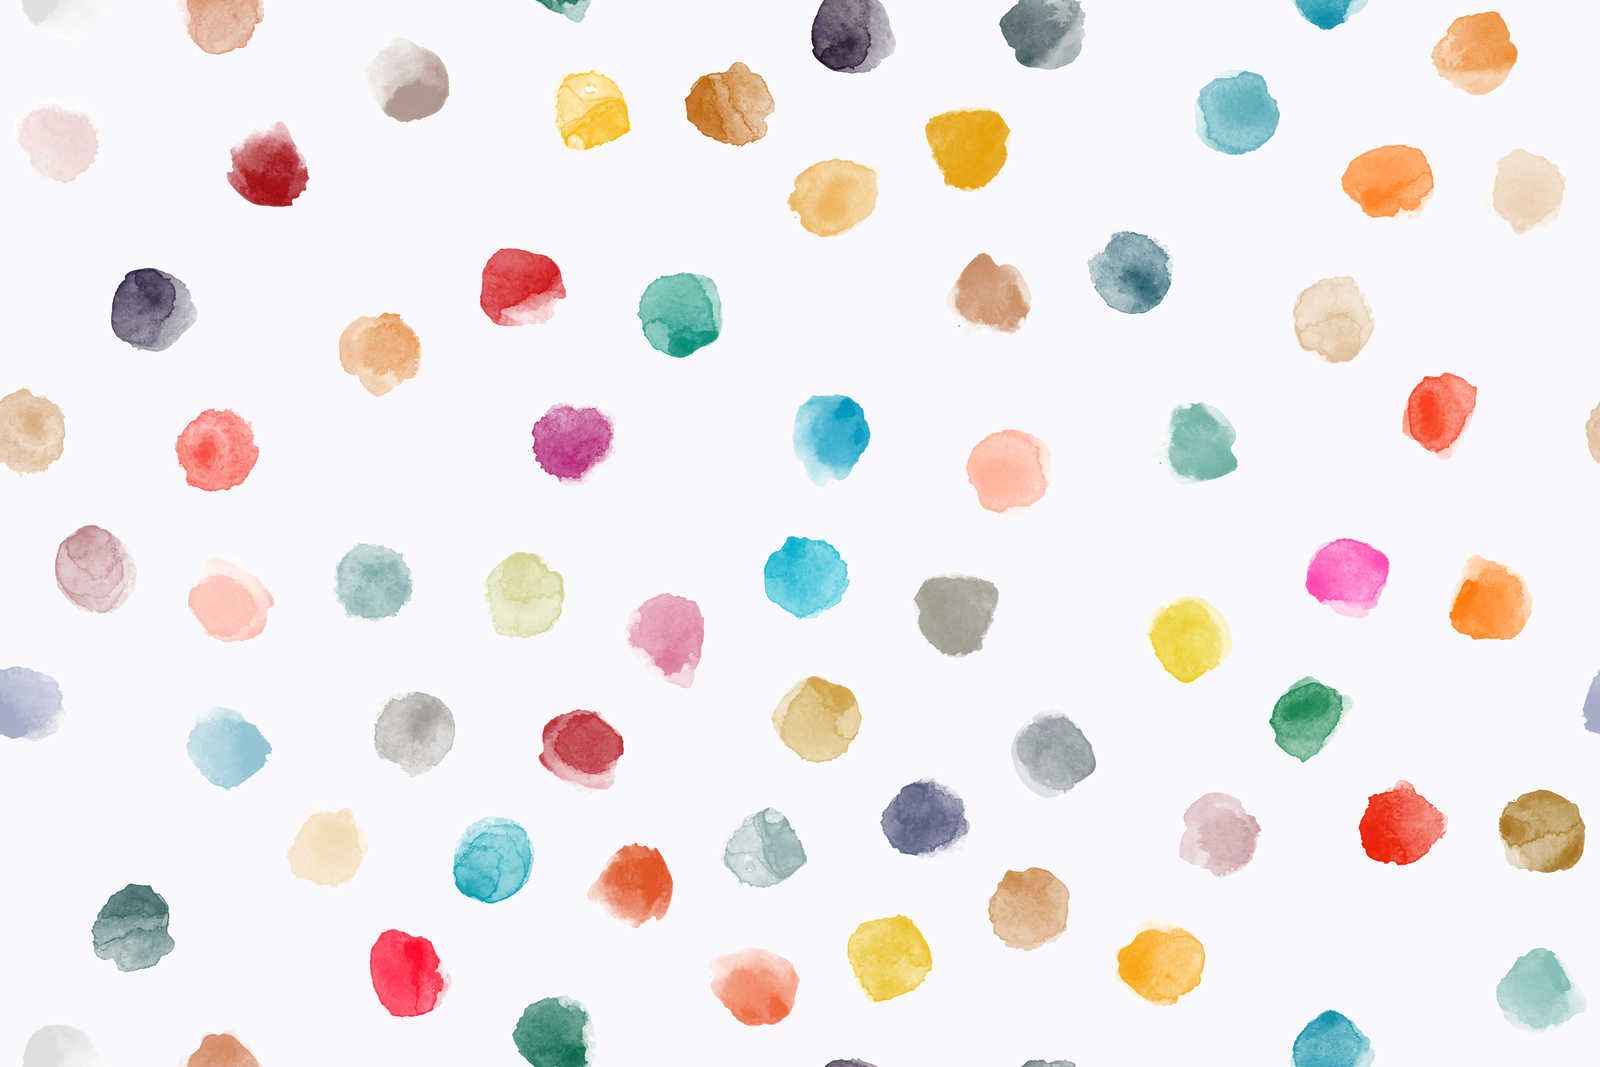             Canvas for children's room with colourful dots - 90 cm x 60 cm
        